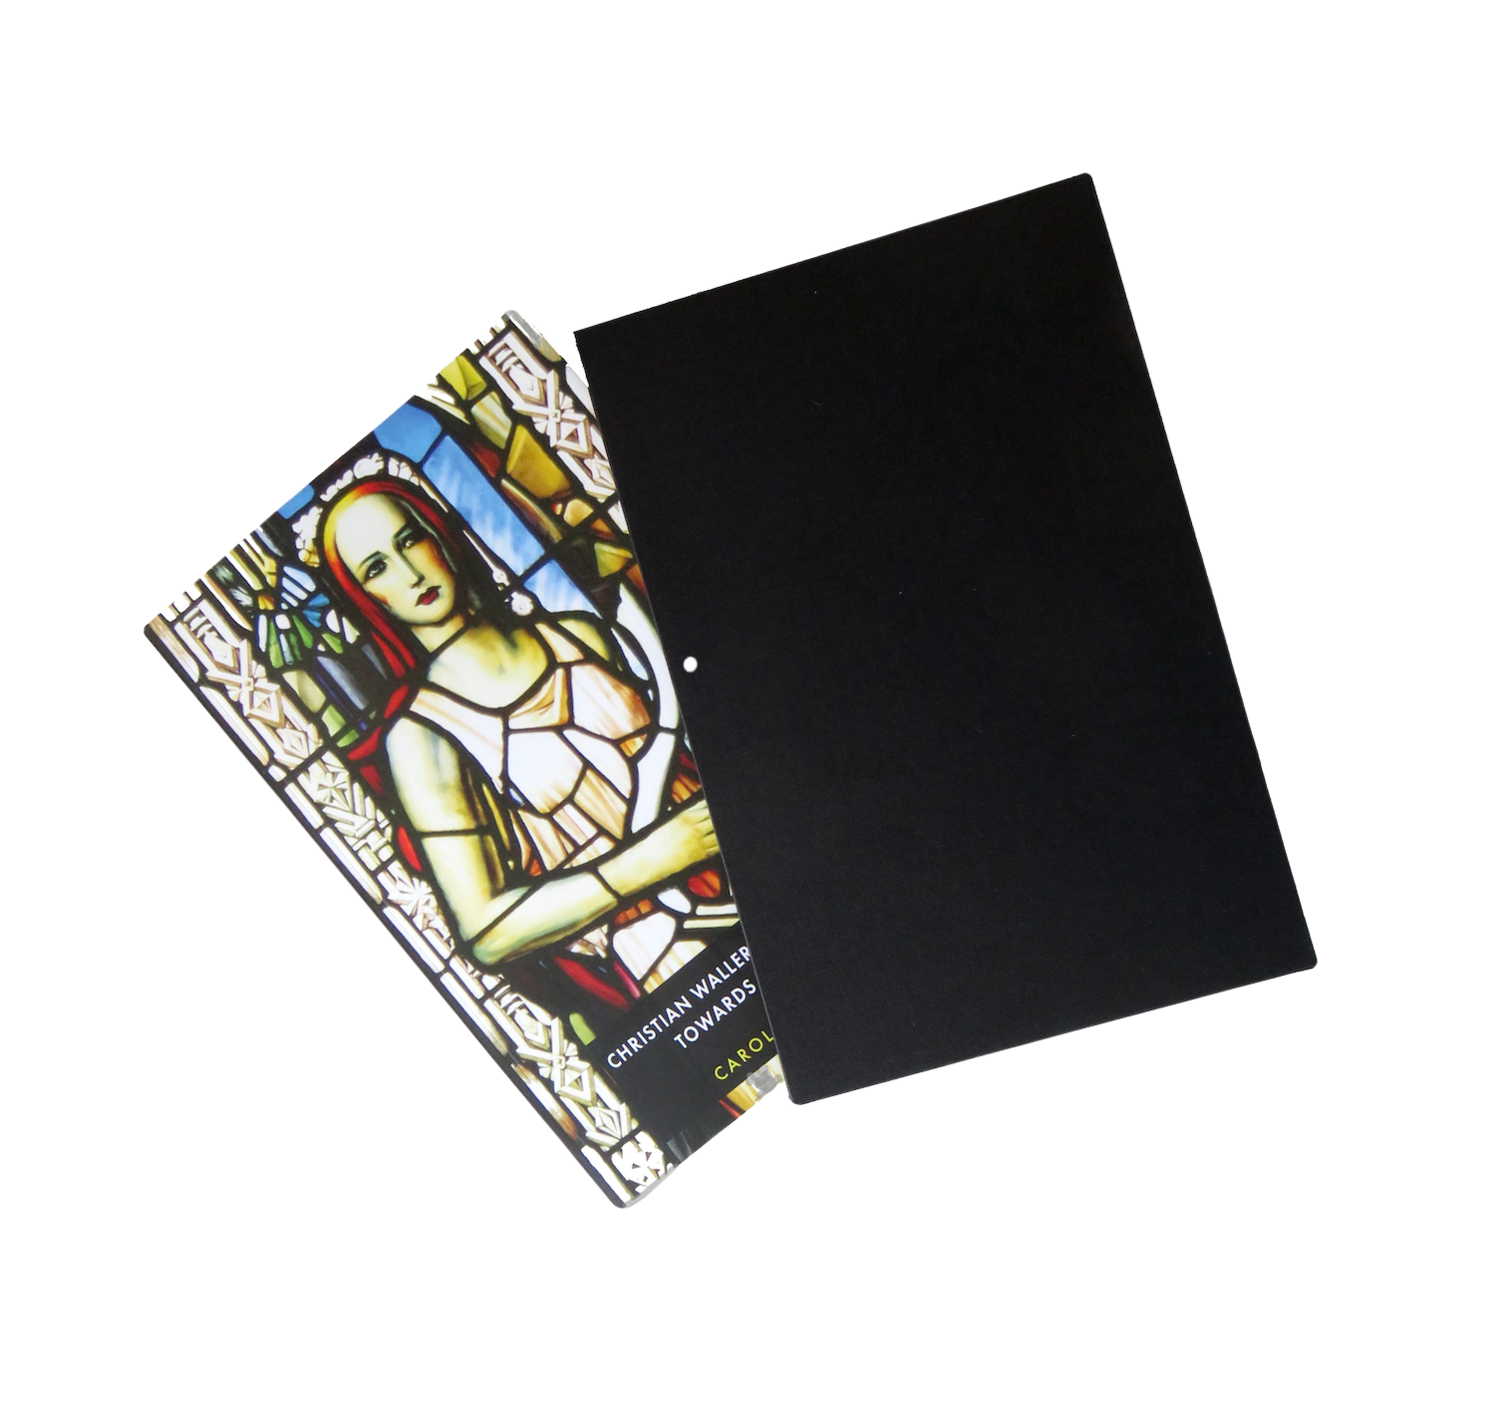 Christian Waller Stained Glass: Towards the Light (with slipcase)